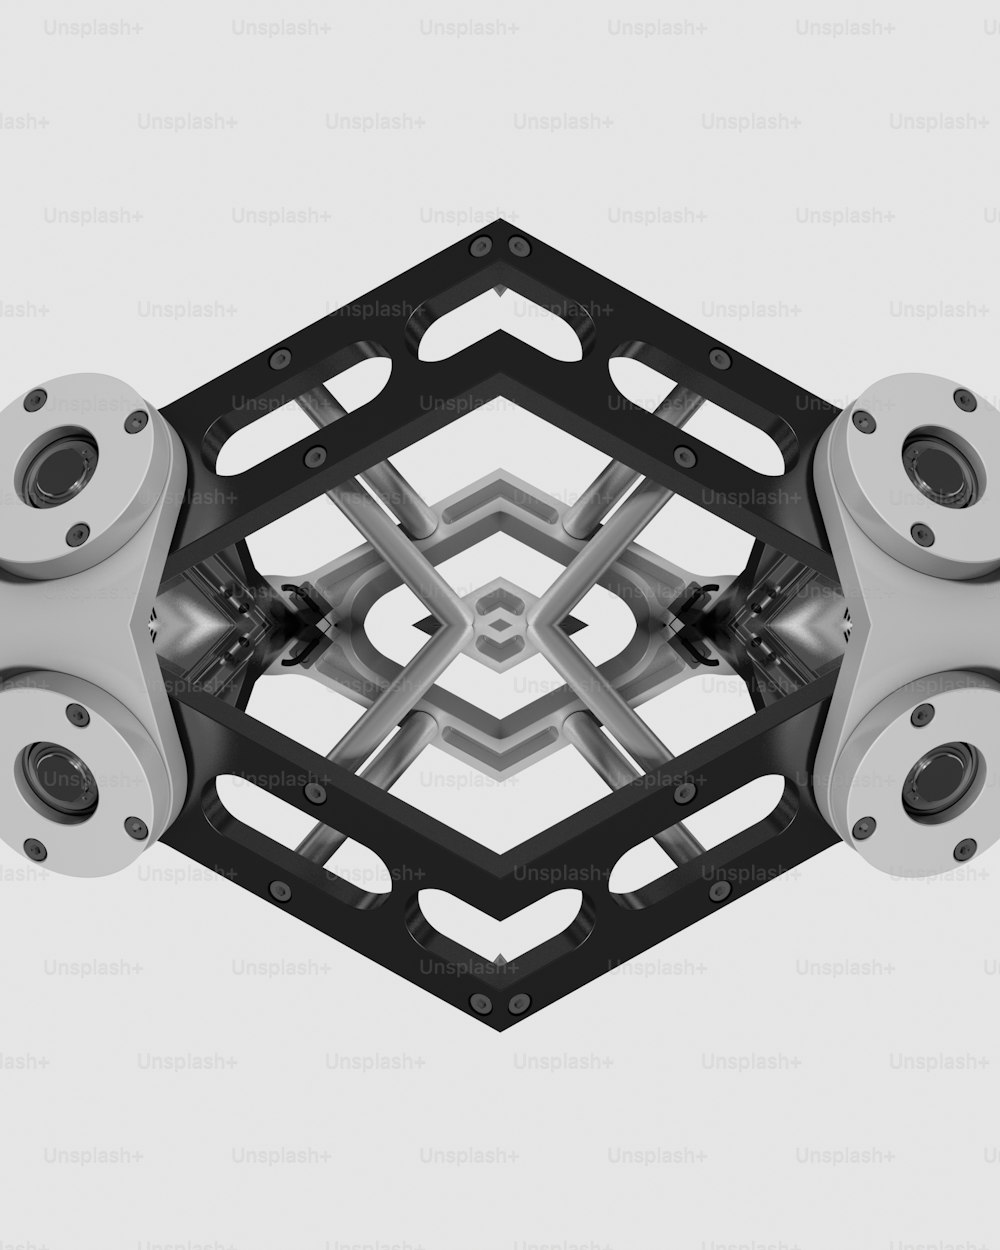 a computer generated image of a hexagonal object